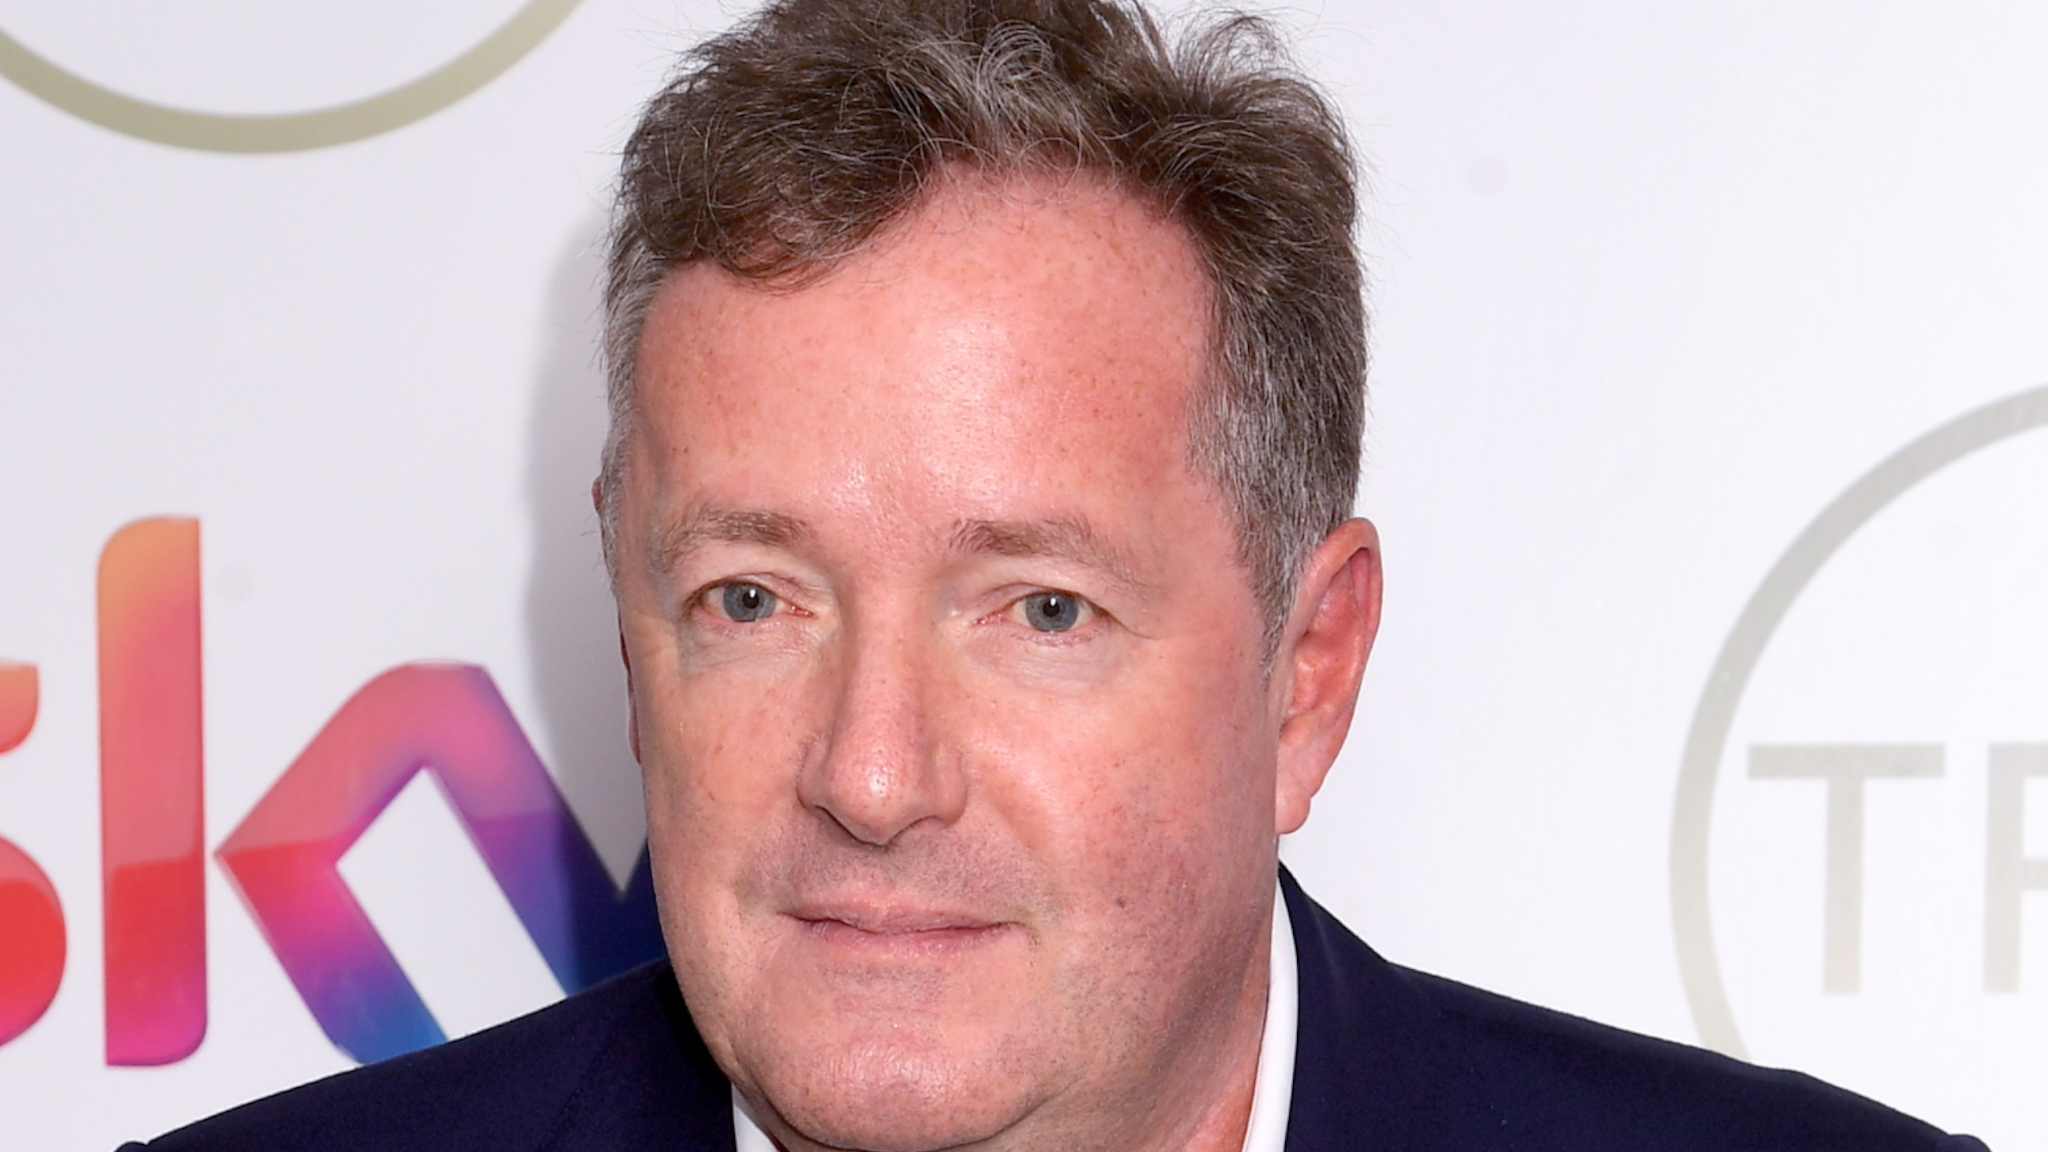 LONDON, ENGLAND - MARCH 10: Piers Morgan attends the TRIC Awards 2020 at The Grosvenor House Hotel on March 10, 2020 in London, England.